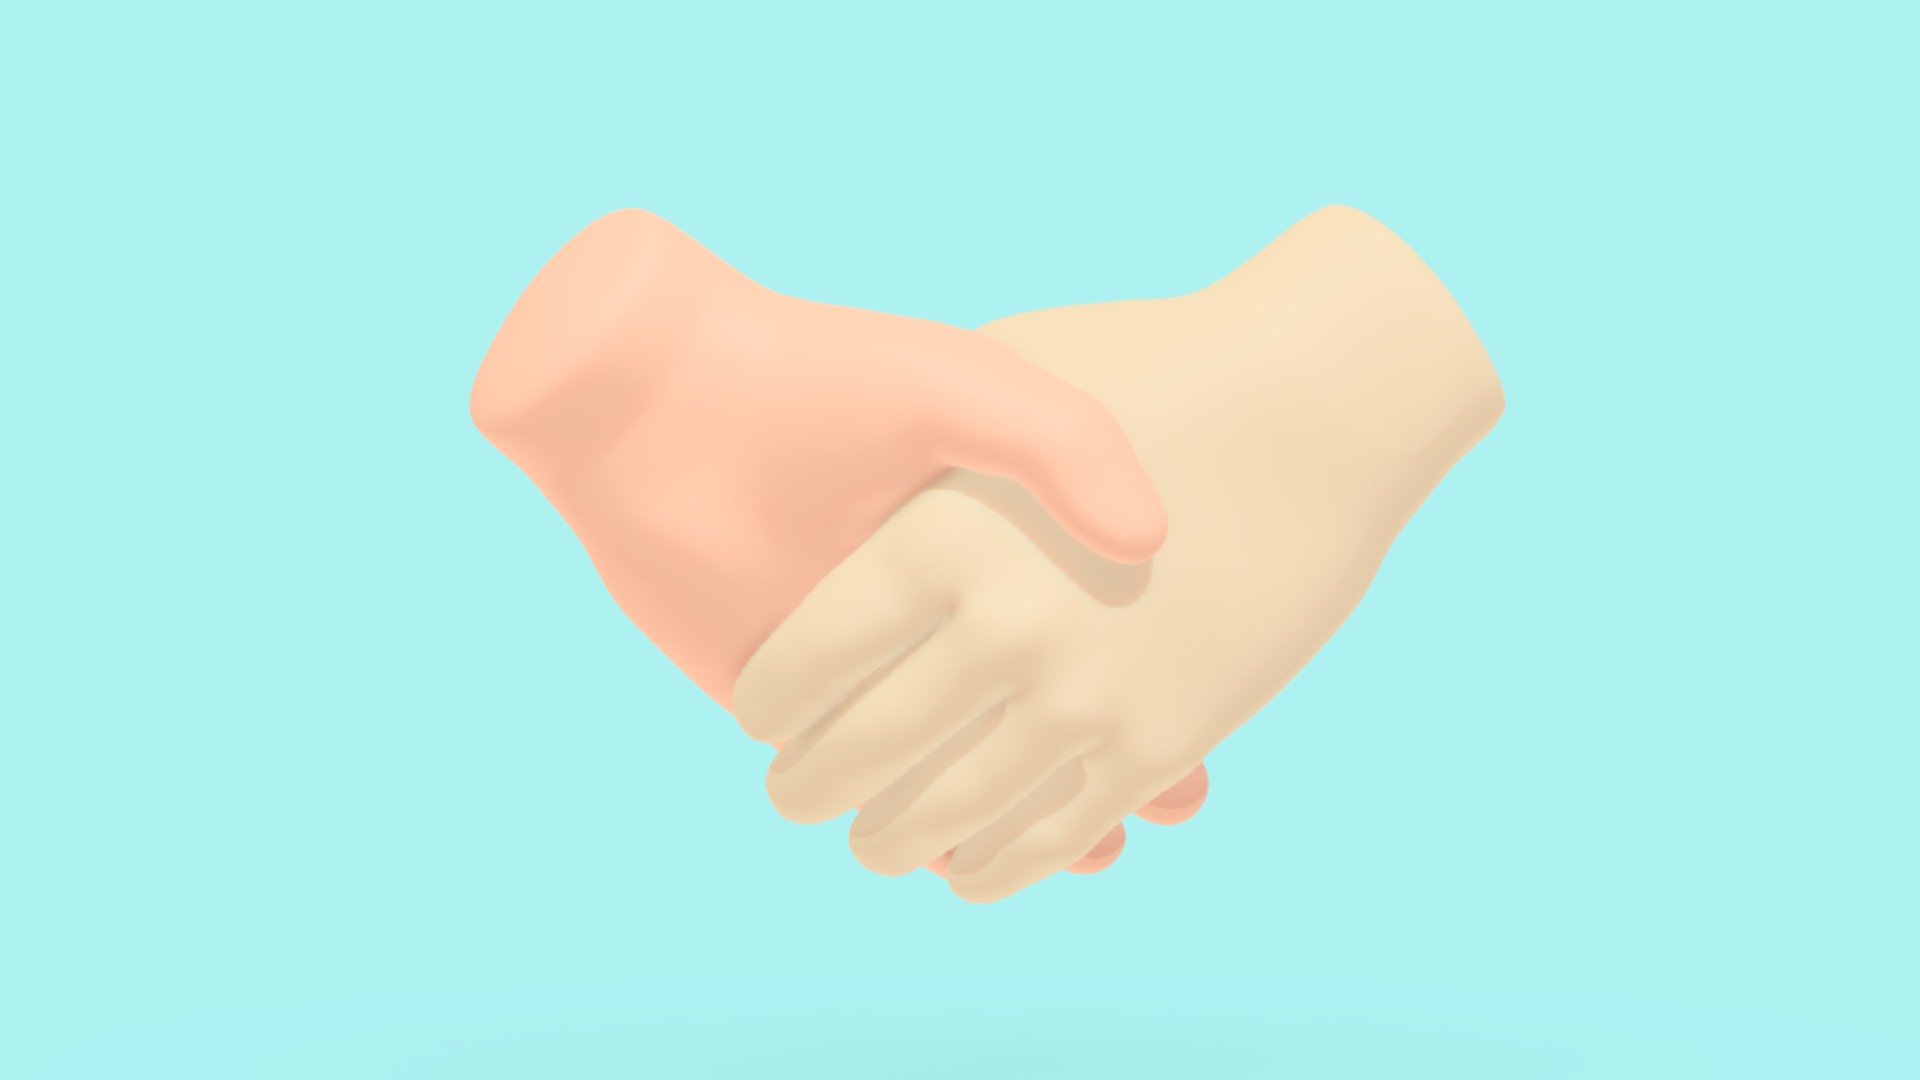 The handshake emoji 🤝 represents a firm handshake between two hands. It signifies agreement, partnership, and friendly greetings. It can be used in both professional and personal contexts to convey unity, cooperation, and trust 3d model